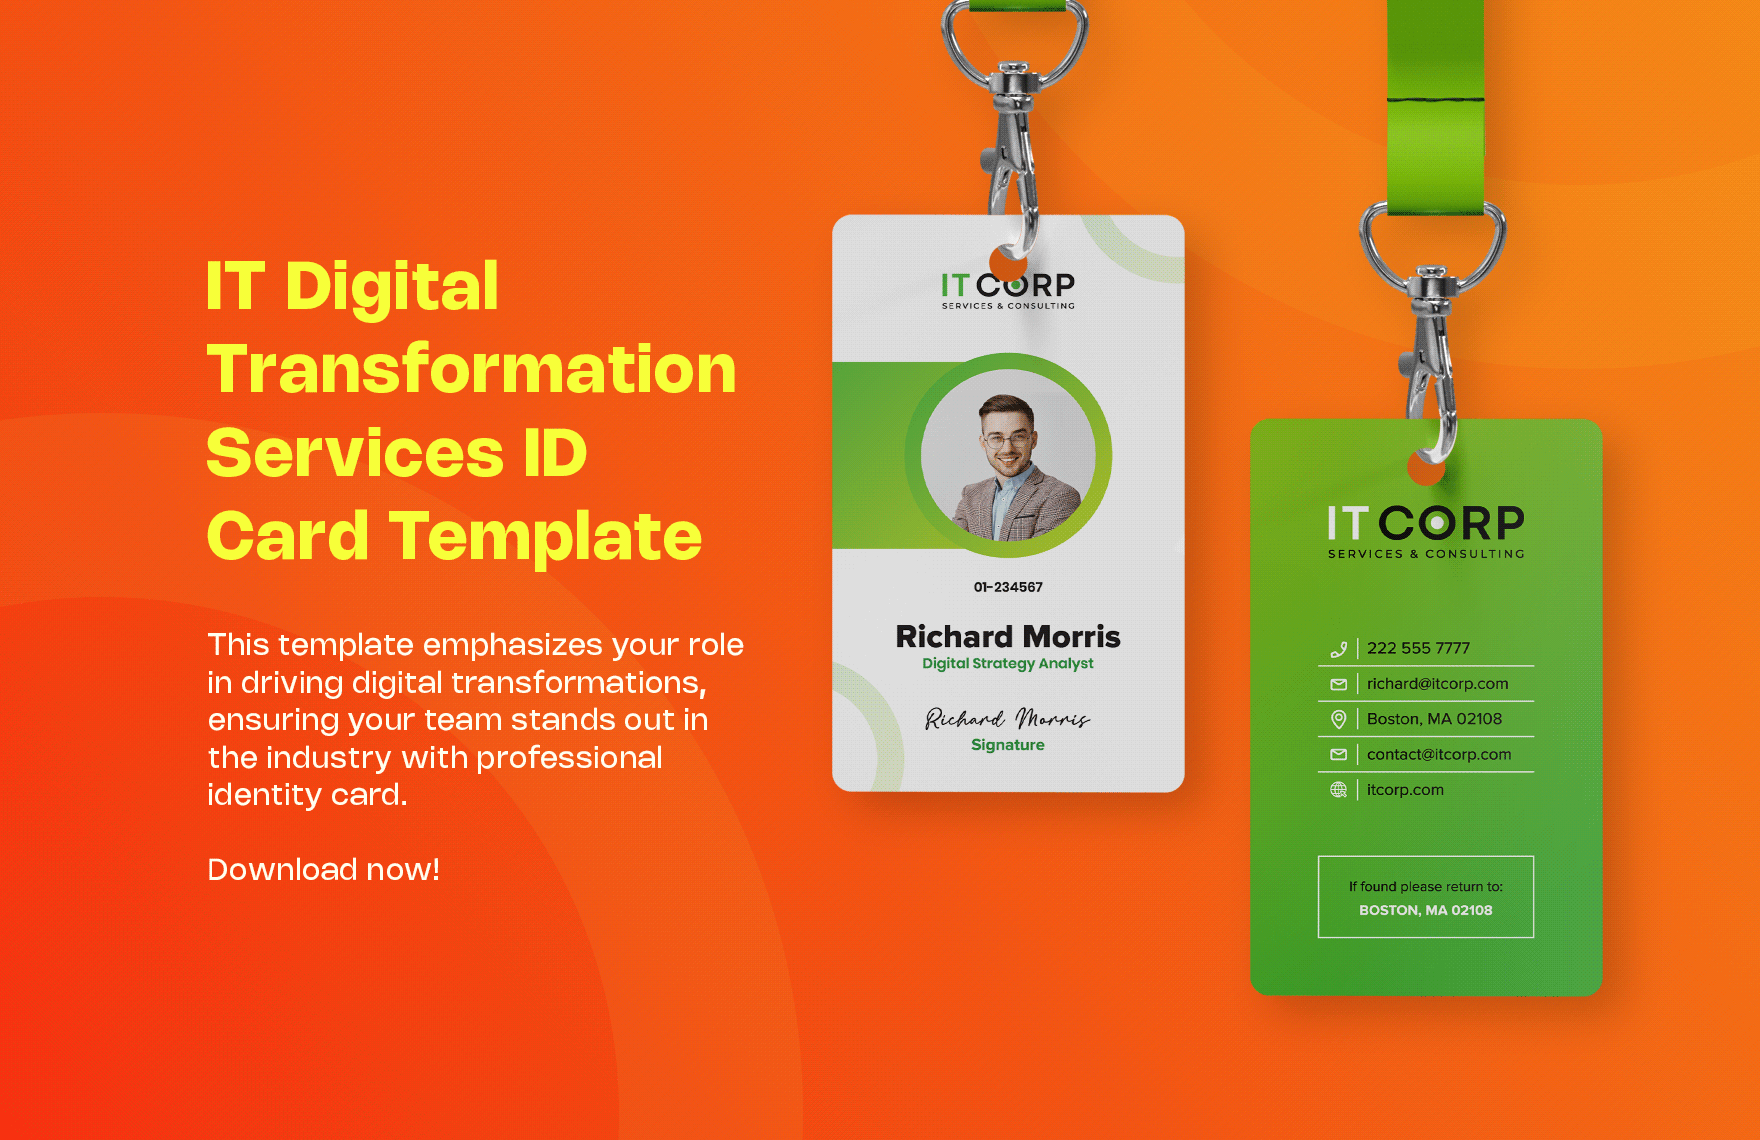 IT Digital Transformation Services ID Card Template